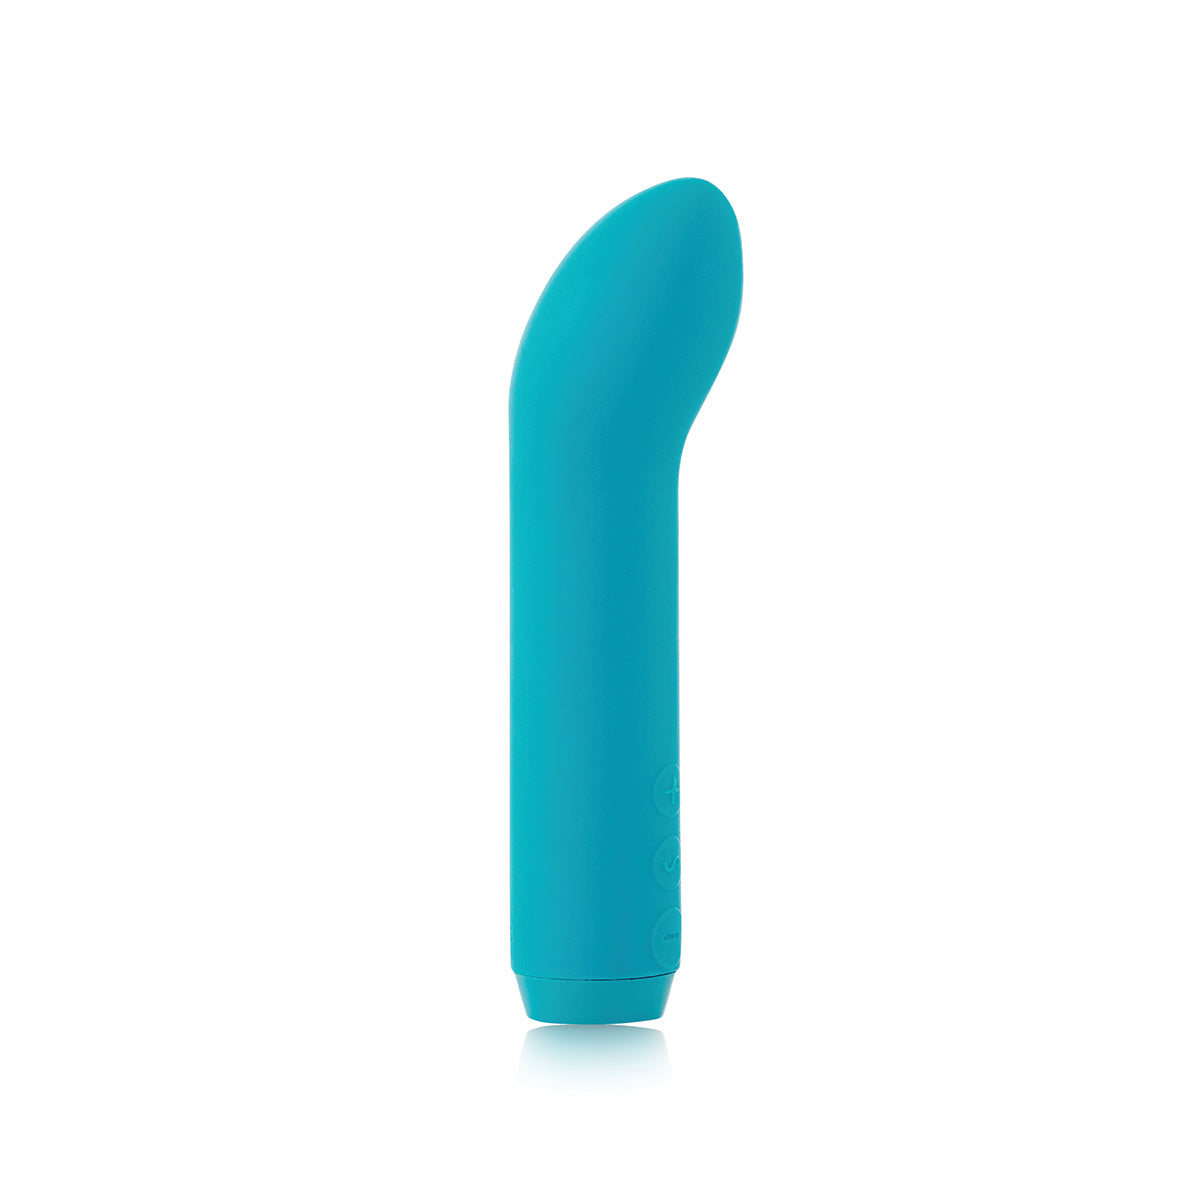 Teal G-Spot bullet shown from right side